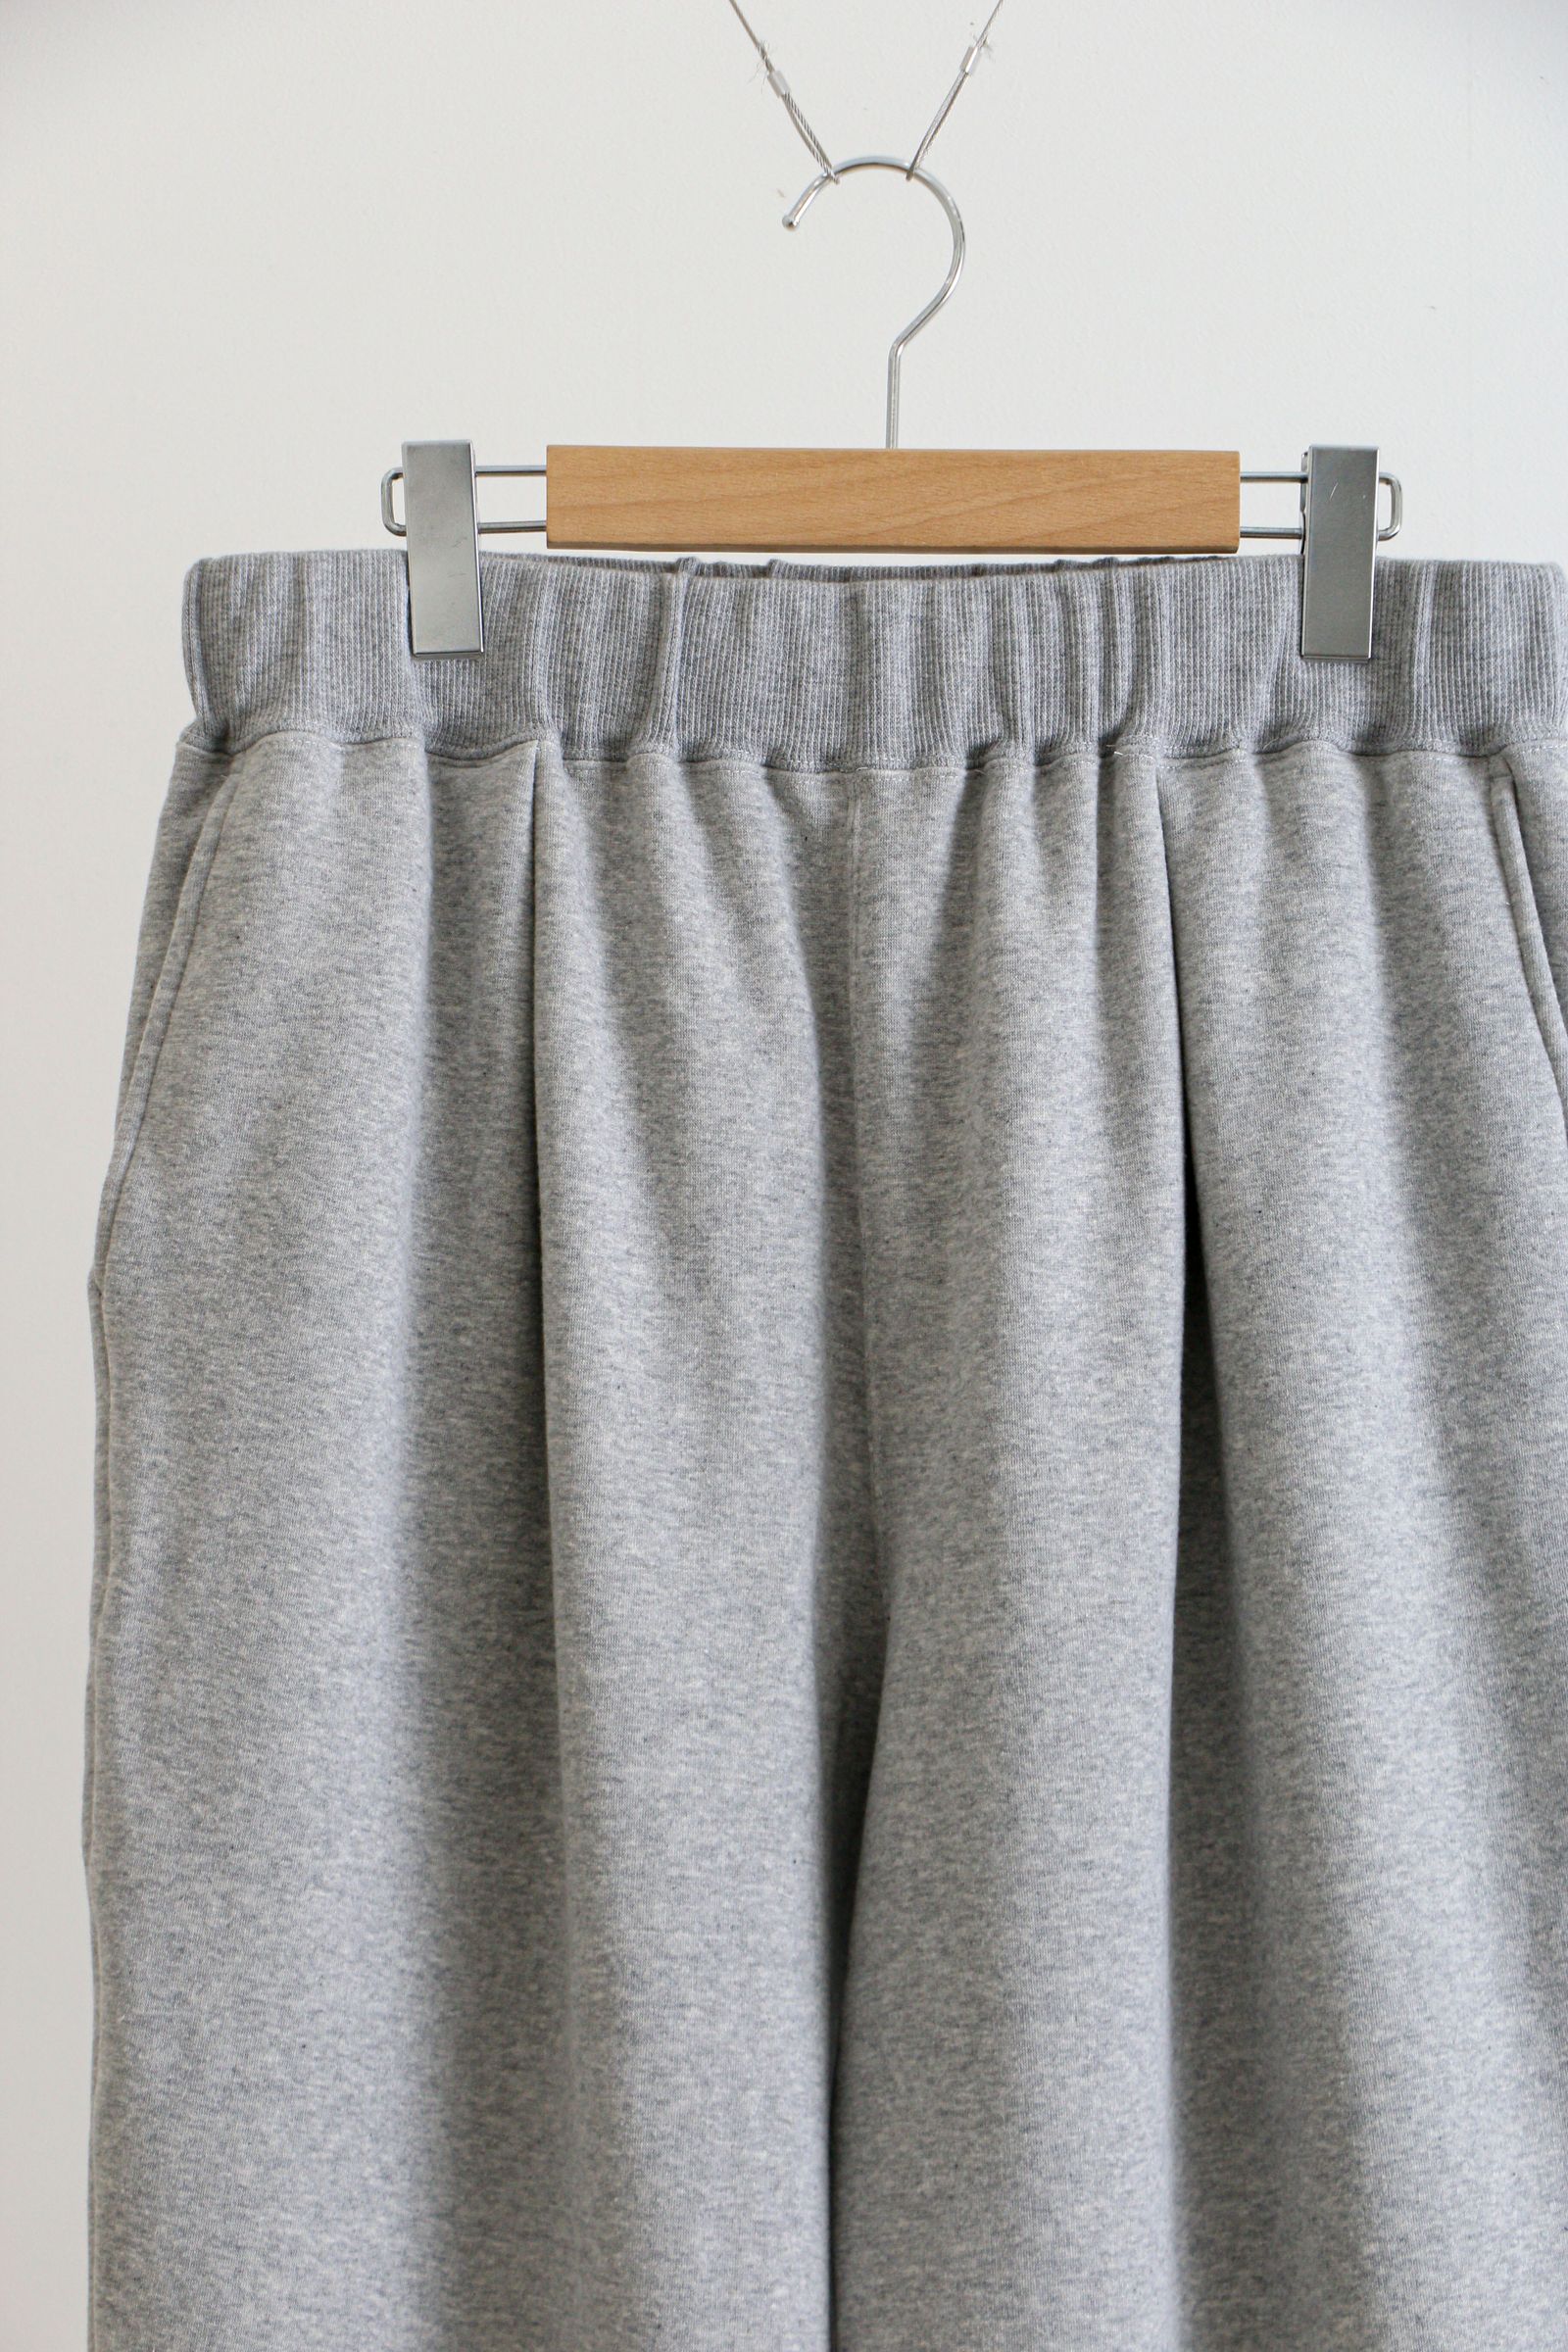 is-ness - RELAX WIDE SWEAT PANT GRAY / グレー / リラックスワイド